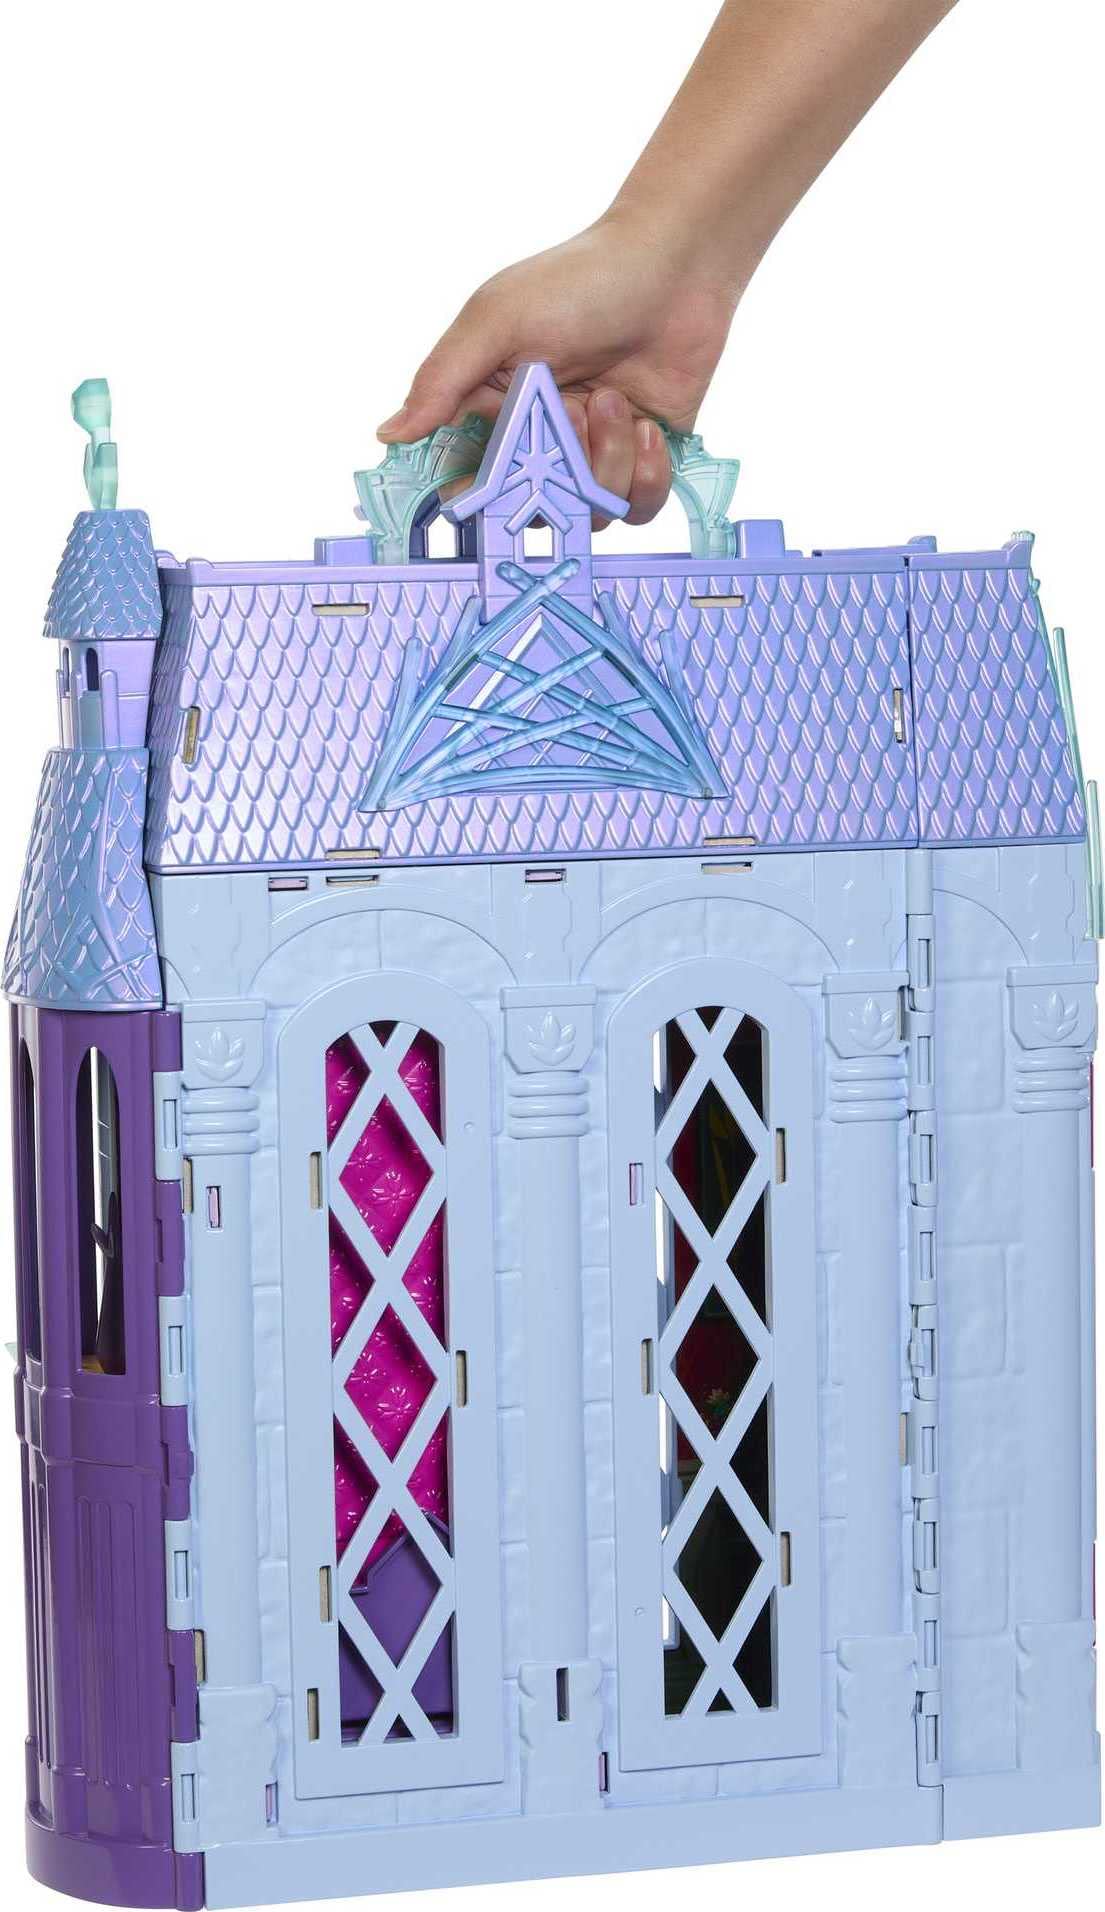 Disney Frozen Arendelle Doll-House Castle (2+ Ft) with Elsa Fashion Doll, 4 Play Areas, and 15 Furniture and Accessory Pieces From Disney's Frozen 2